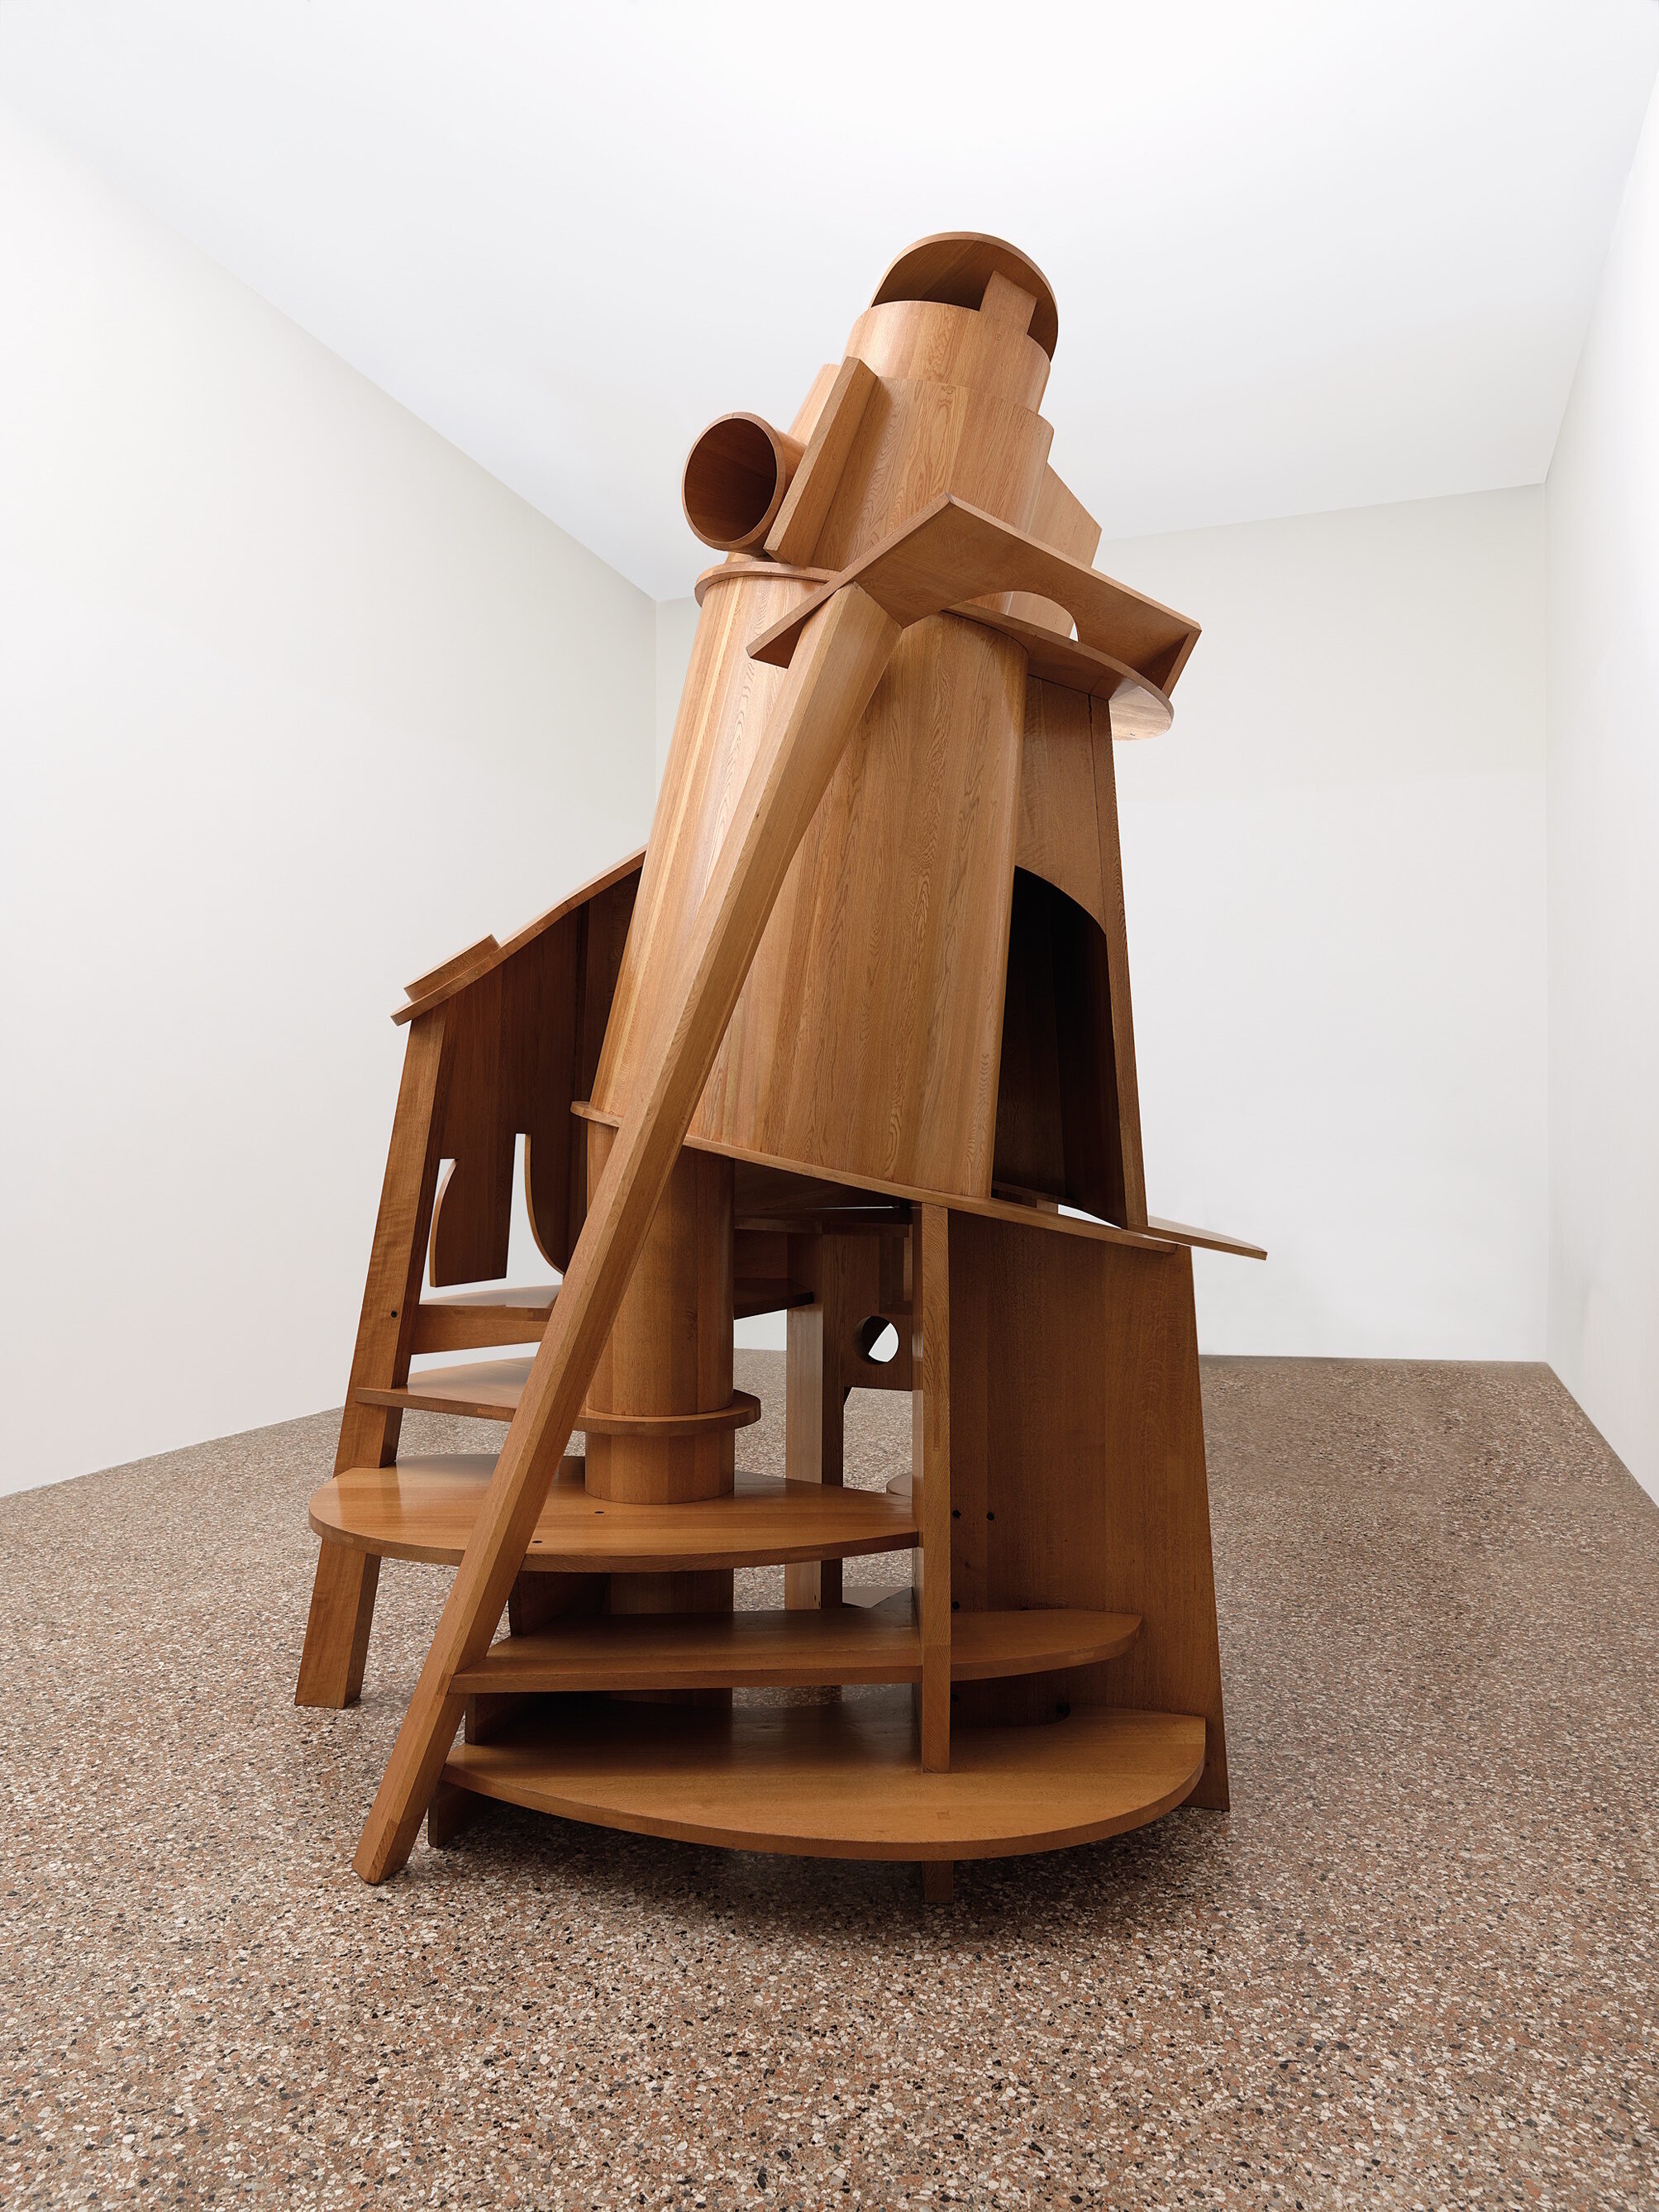 Anthony Caro, Sculptures, Ausstellung,Kunstausstellung, Skulpturenkunst, Wuppertal, Skulpturenpark Waldfrieden, Child's Tower Room, Mike Bruce